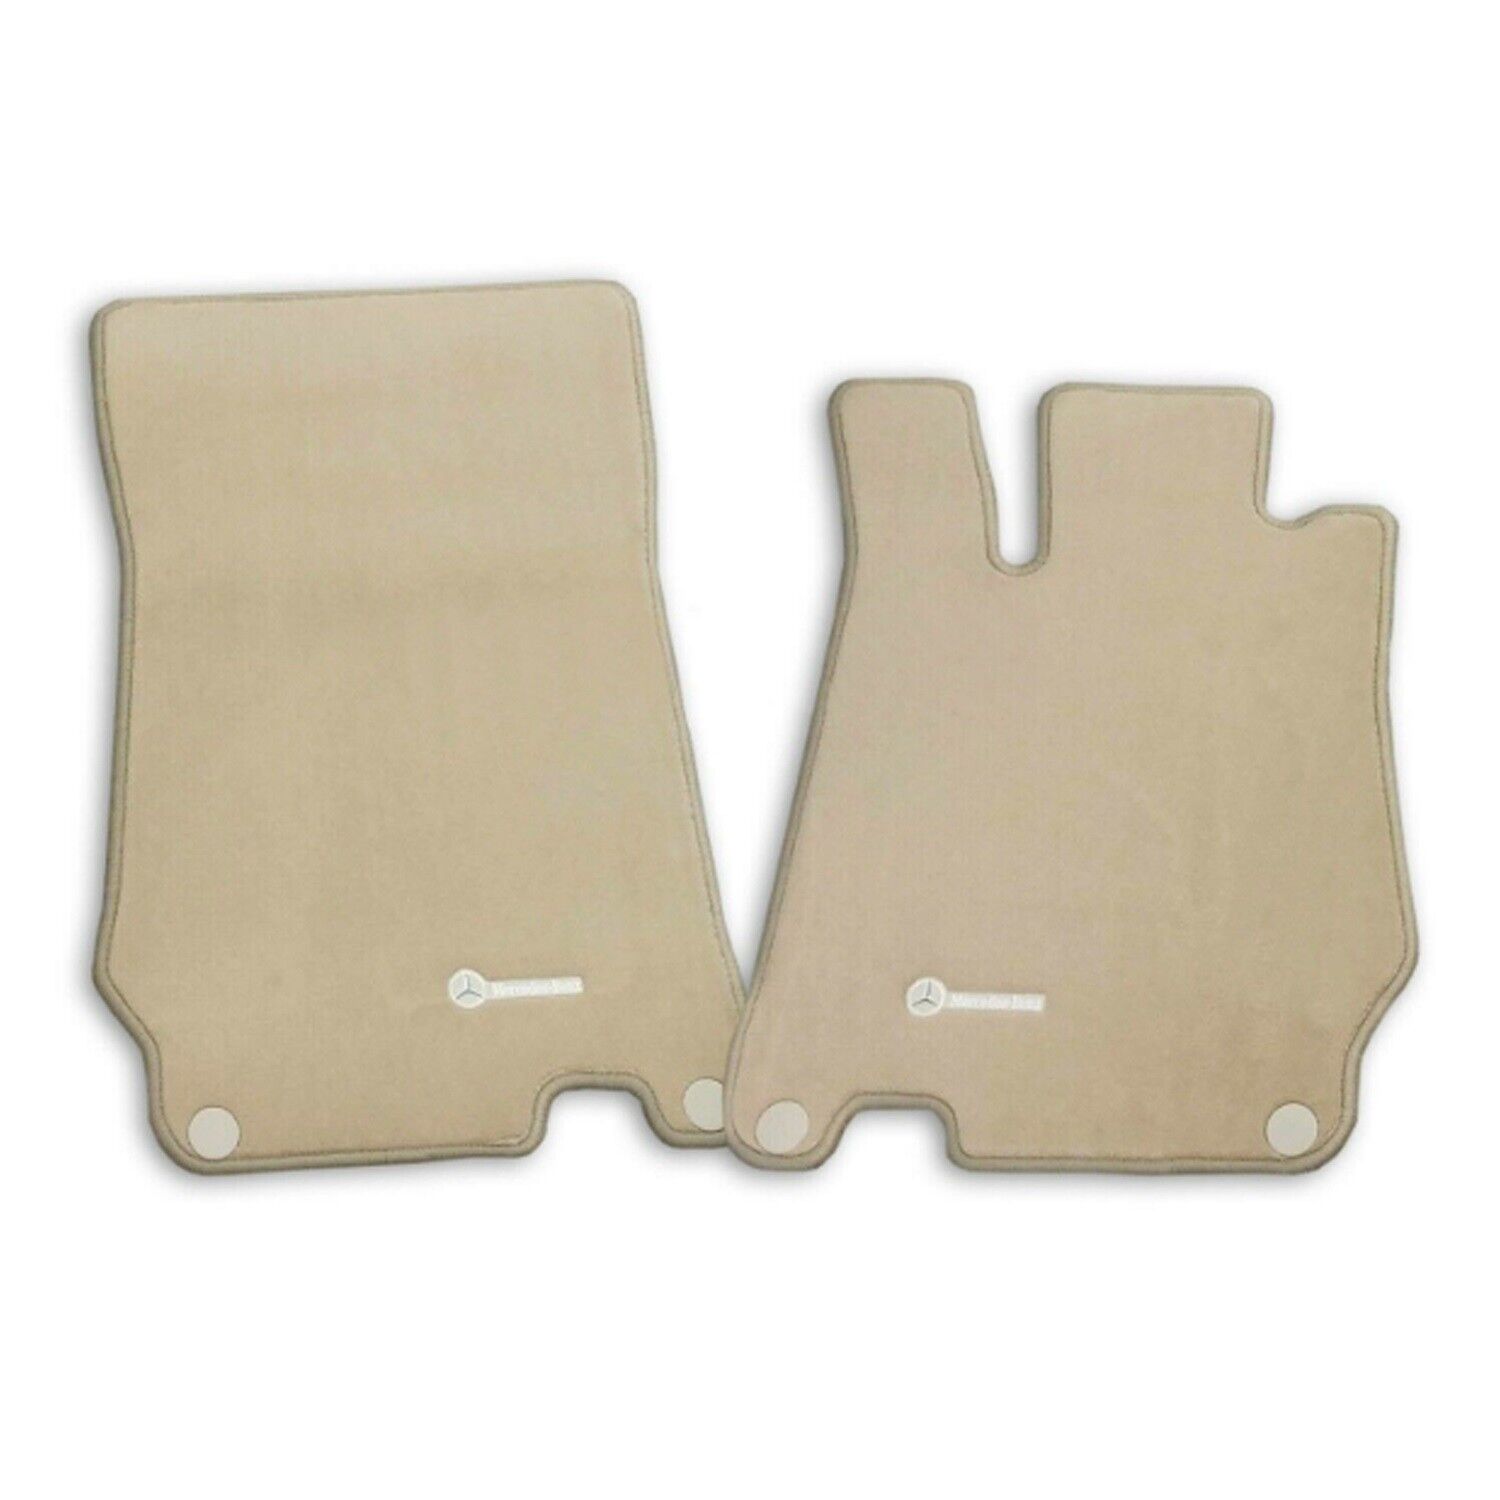 Genuine Front Carpeted Stone Floor Mats Set For Mercedes R230 SL-Class 2003-2012